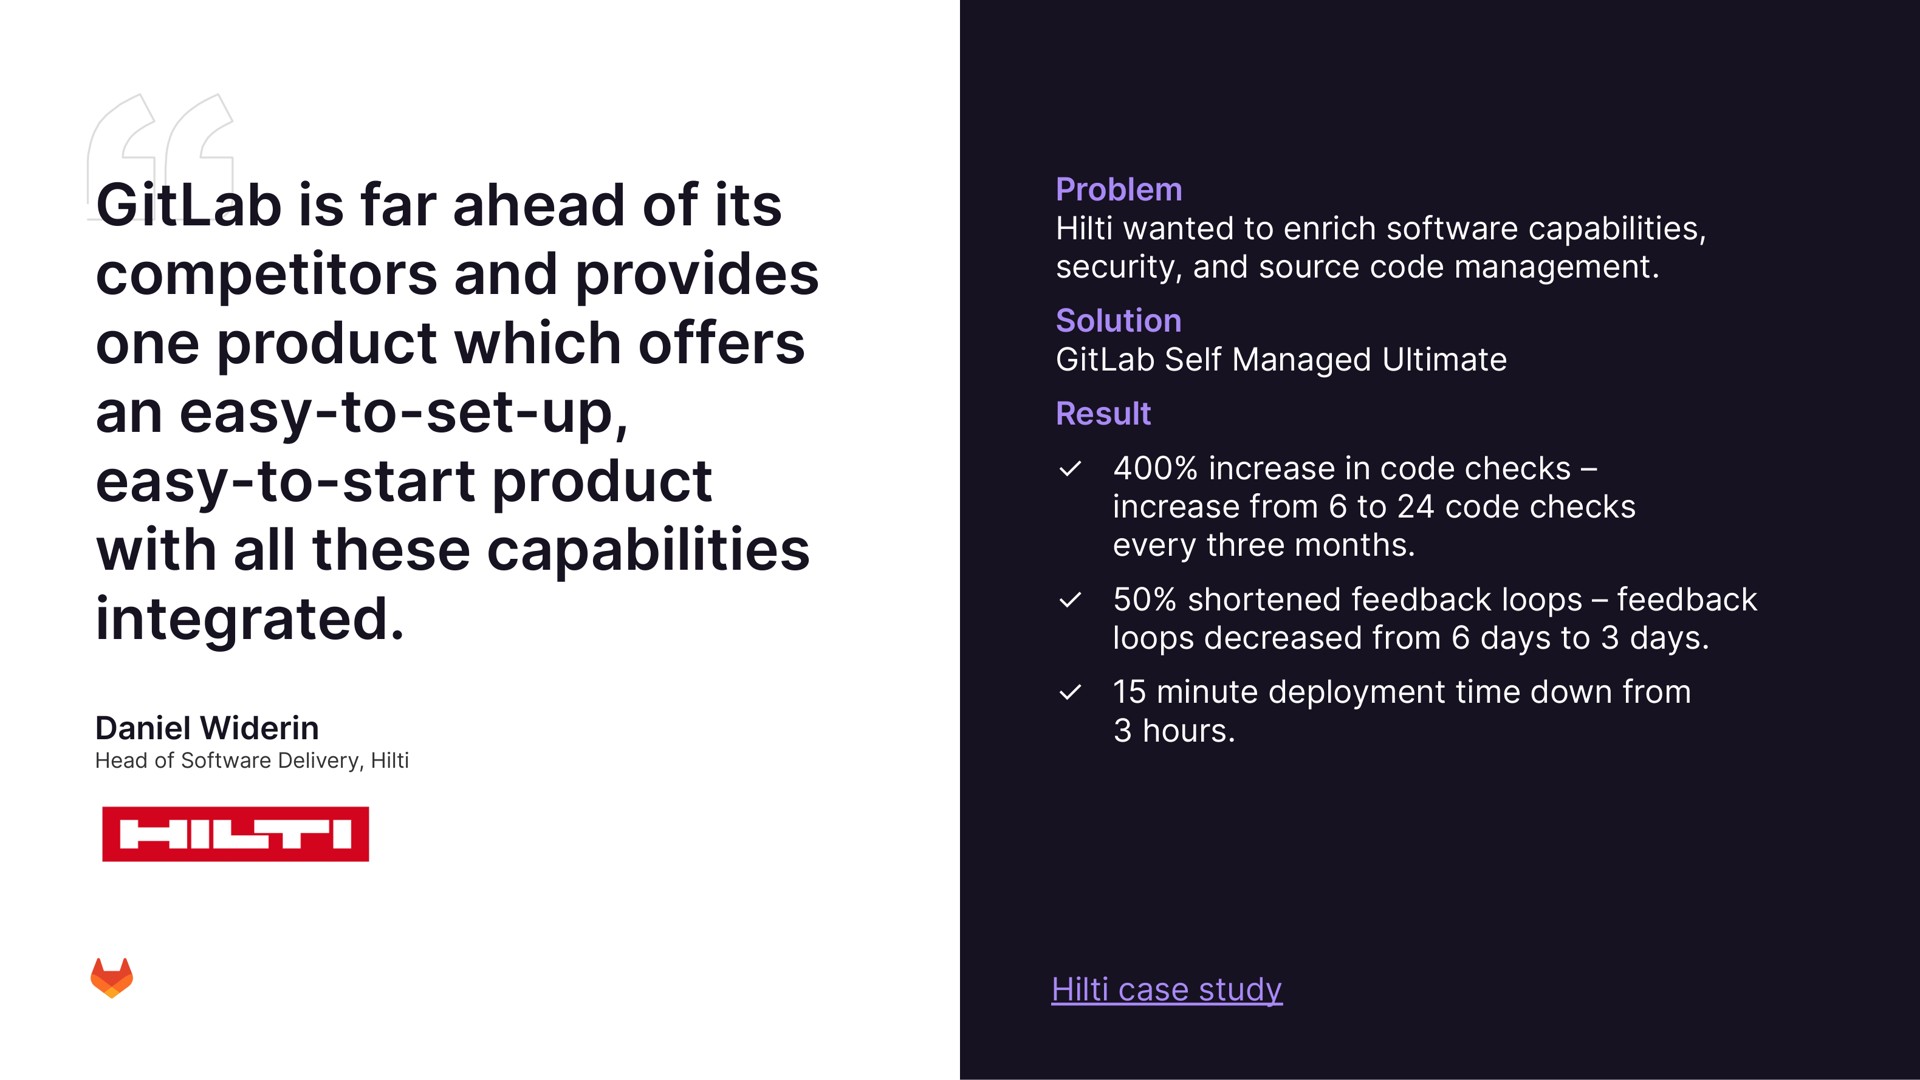 is far ahead of its competitors and provides one product which offers an easy to set up easy to start product with all these capabilities integrated col | GitLab